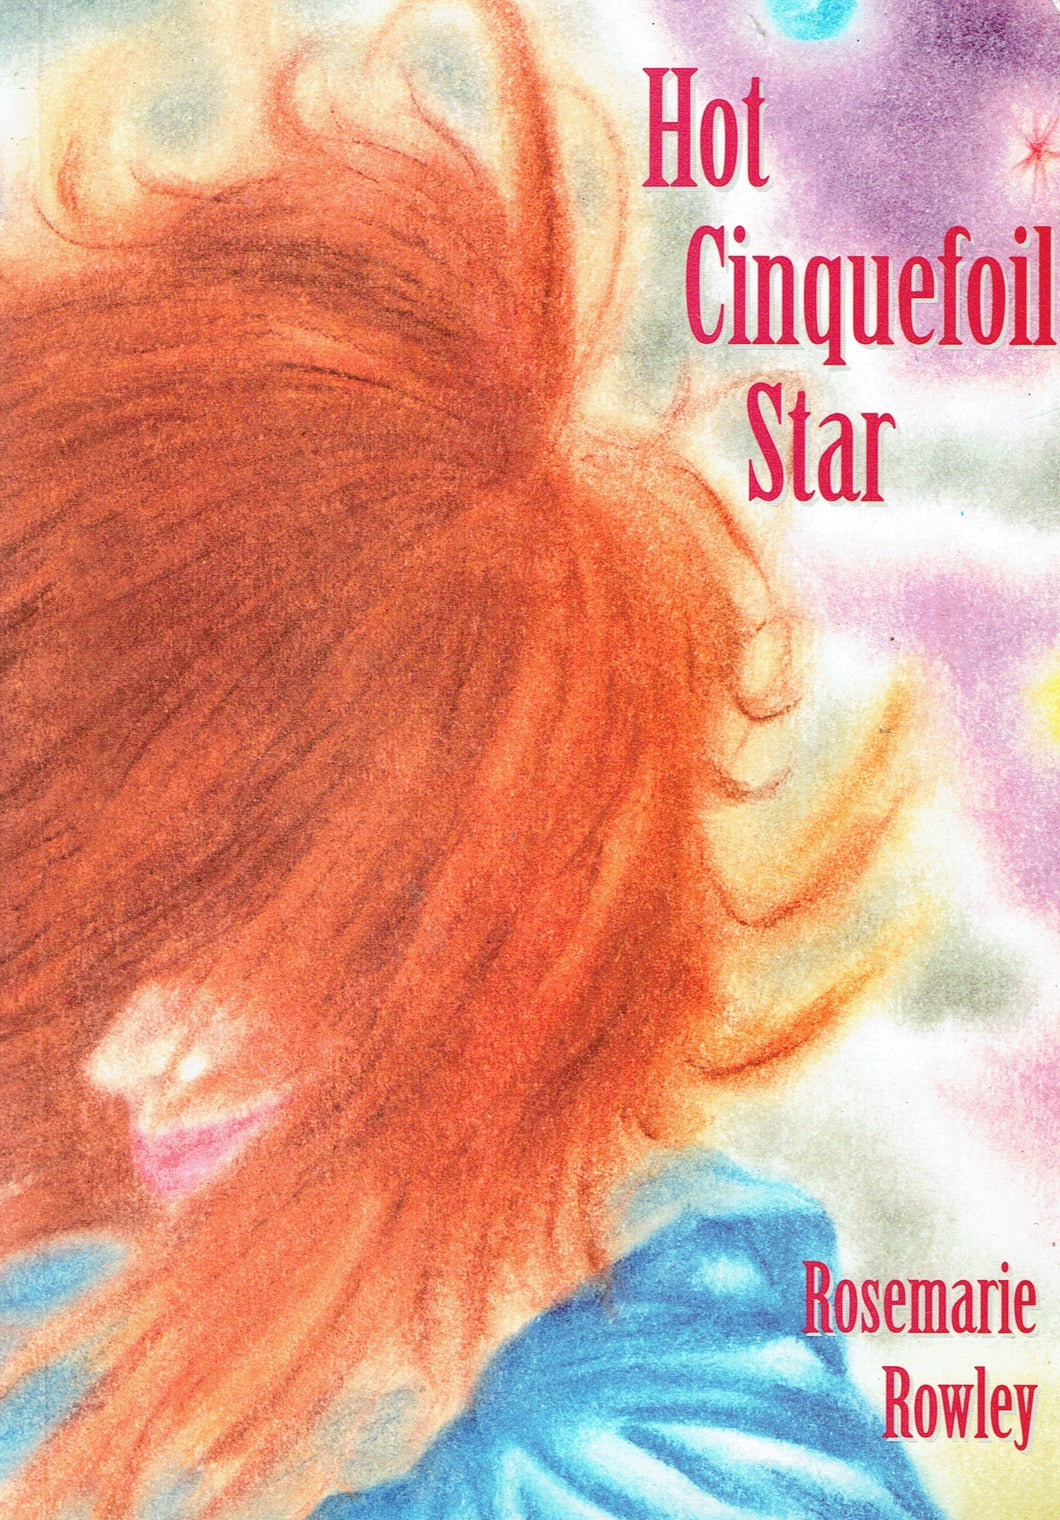 Hot cinquefoil star: Five long poems ; a tale in verse, a riposte, a sequence, a garland, and a letter